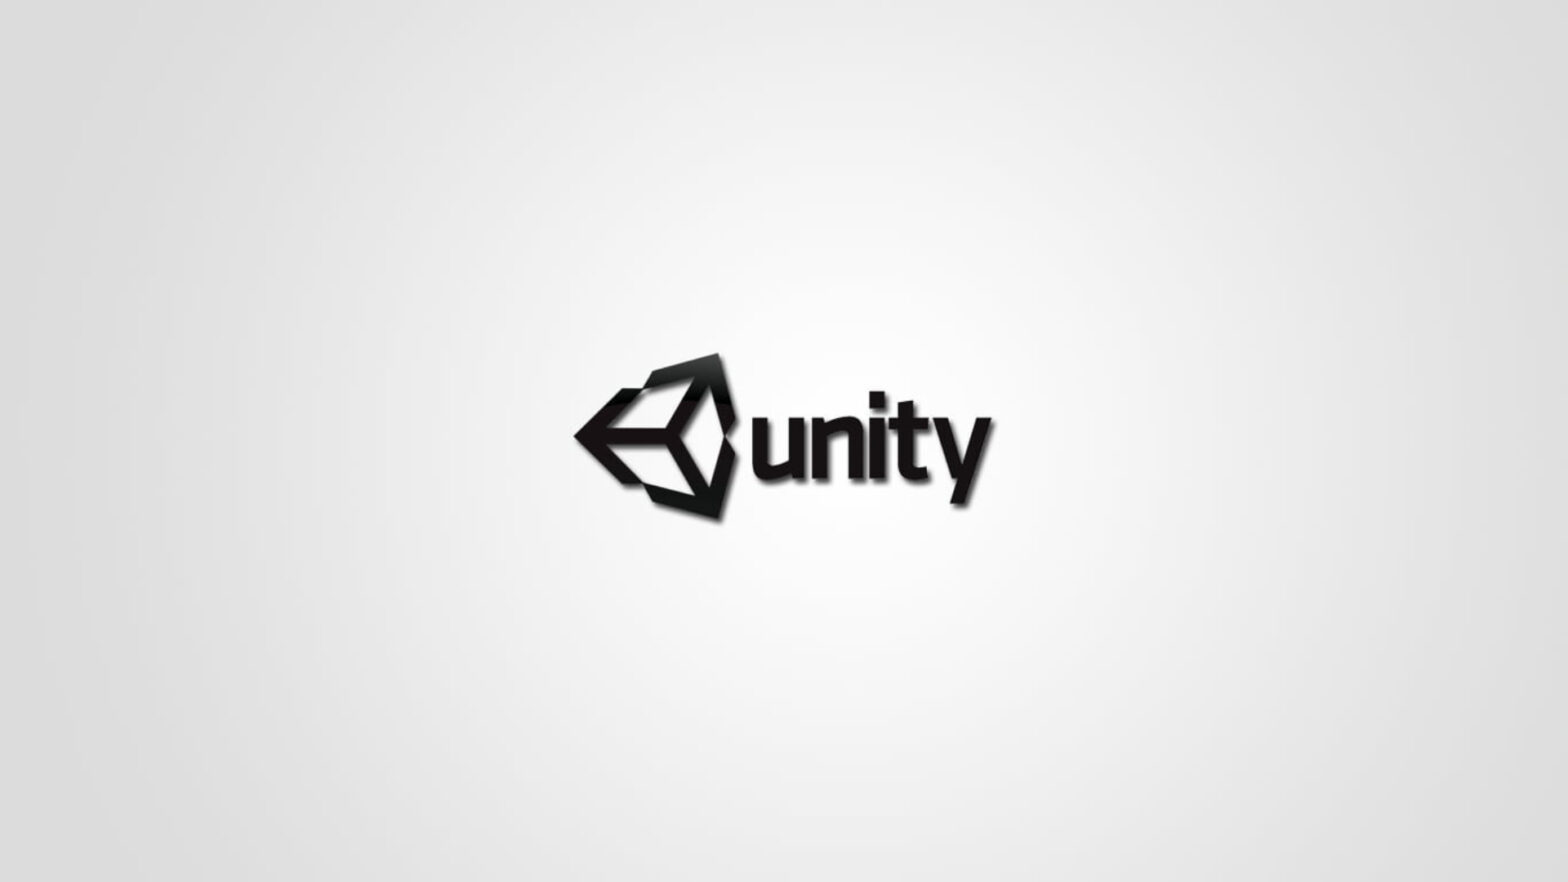 Unity has apologized to the community and redesigned its new monetization system